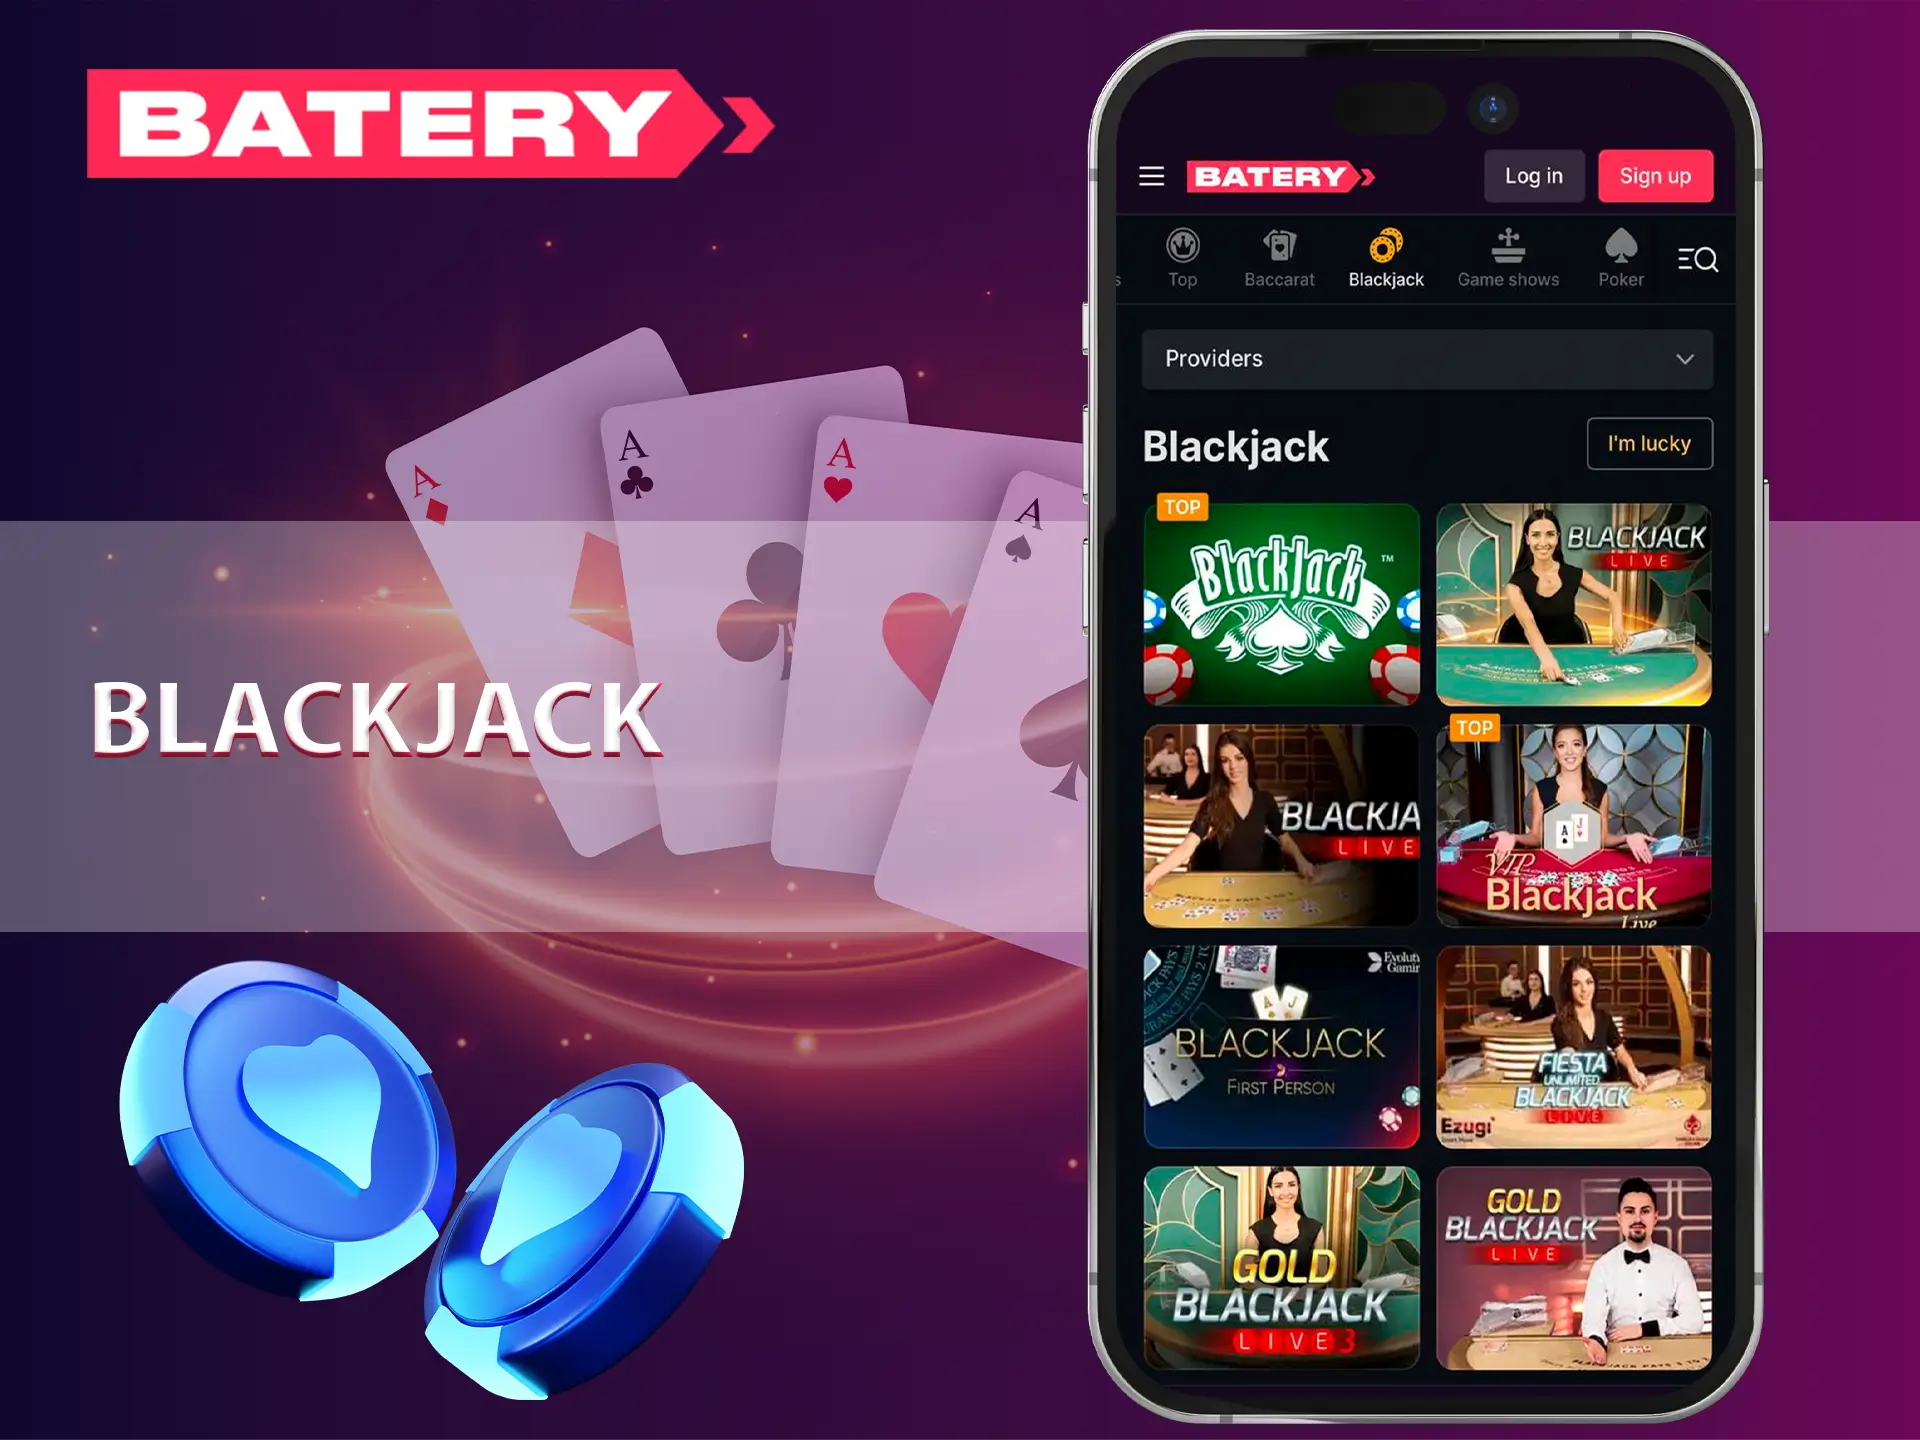 Win at Blackjack from Batery Casino.